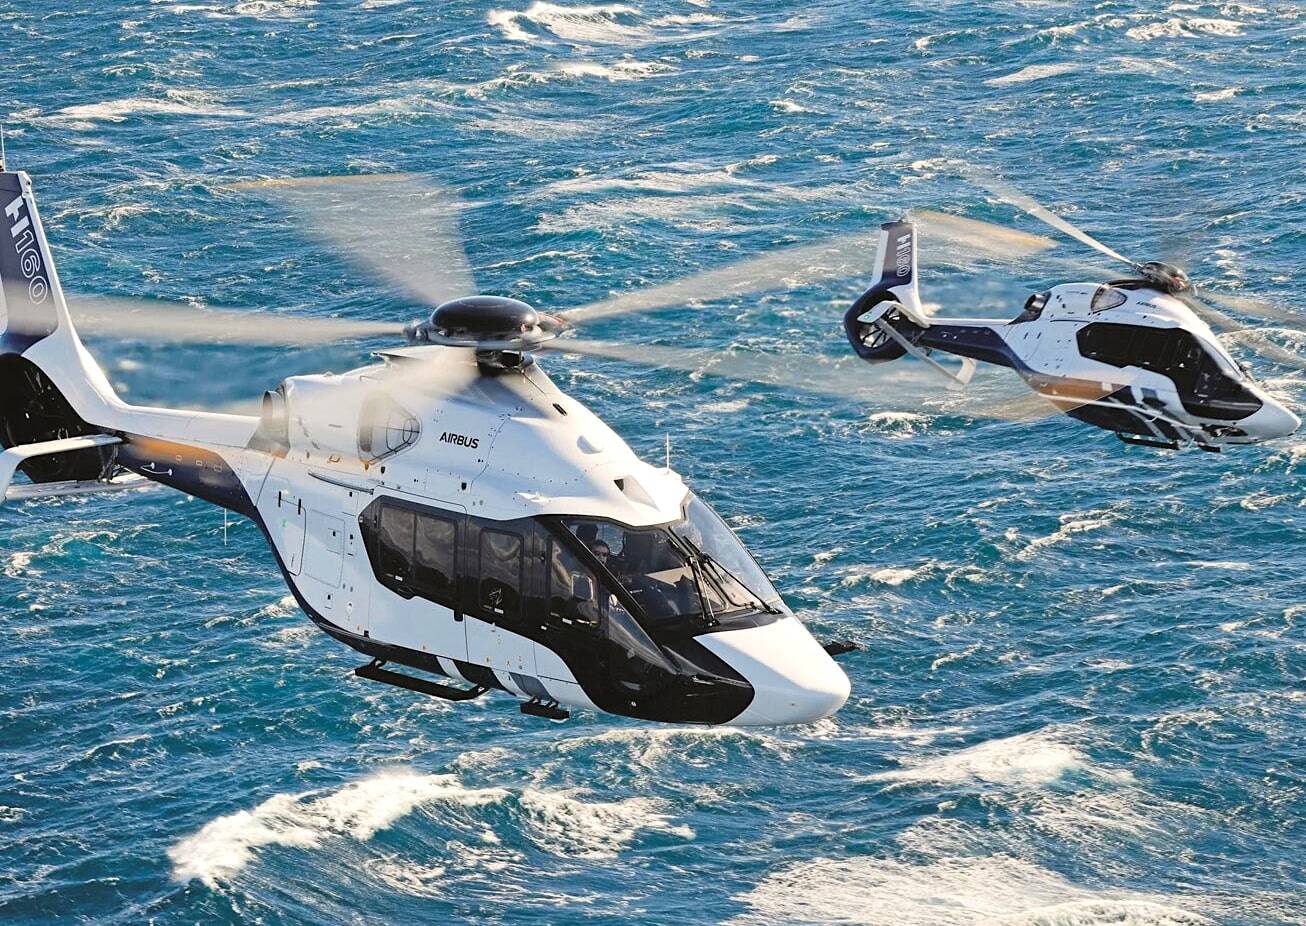 Two helicopters flying above the sea